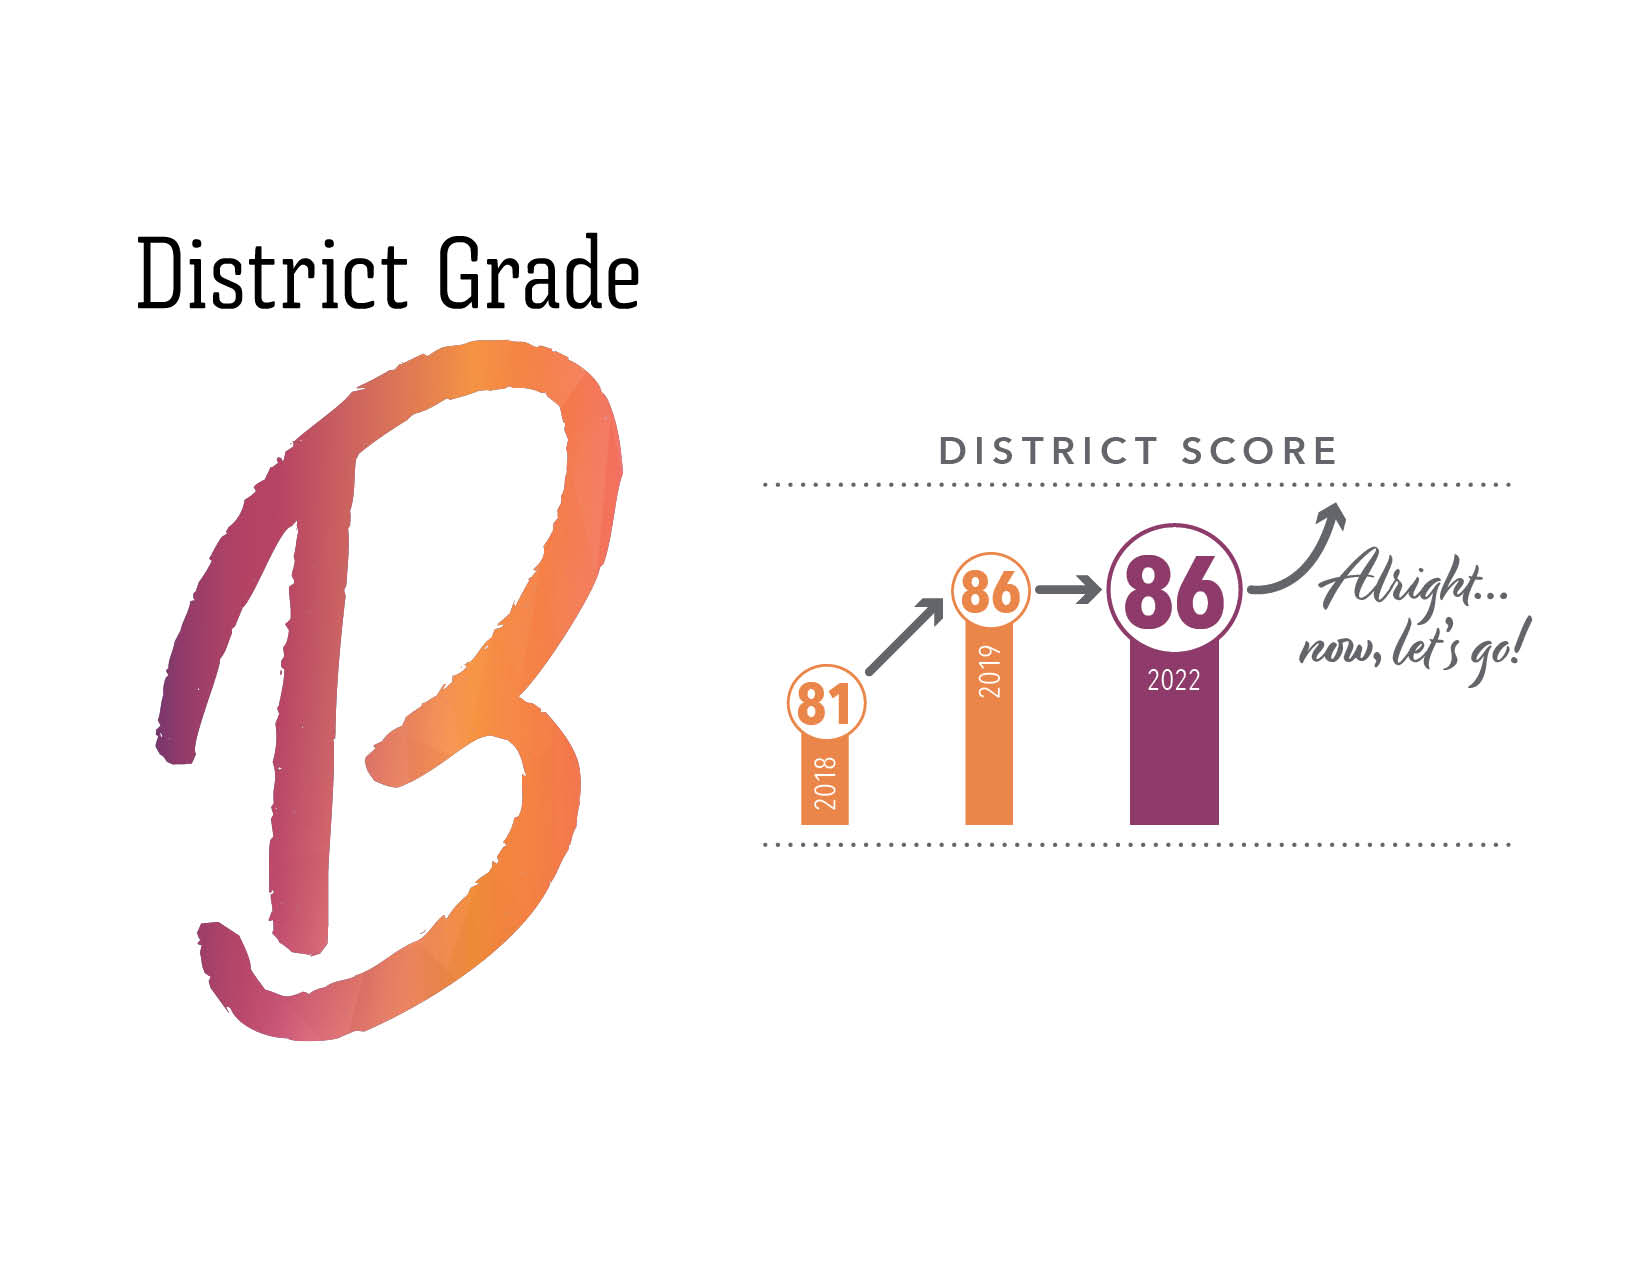 A white background with a multicolored graphic shown depicting DISD's new 'B' rating score with text reading 'District Grade: B' 'District score: 86' 'Alright... now, let's go!'